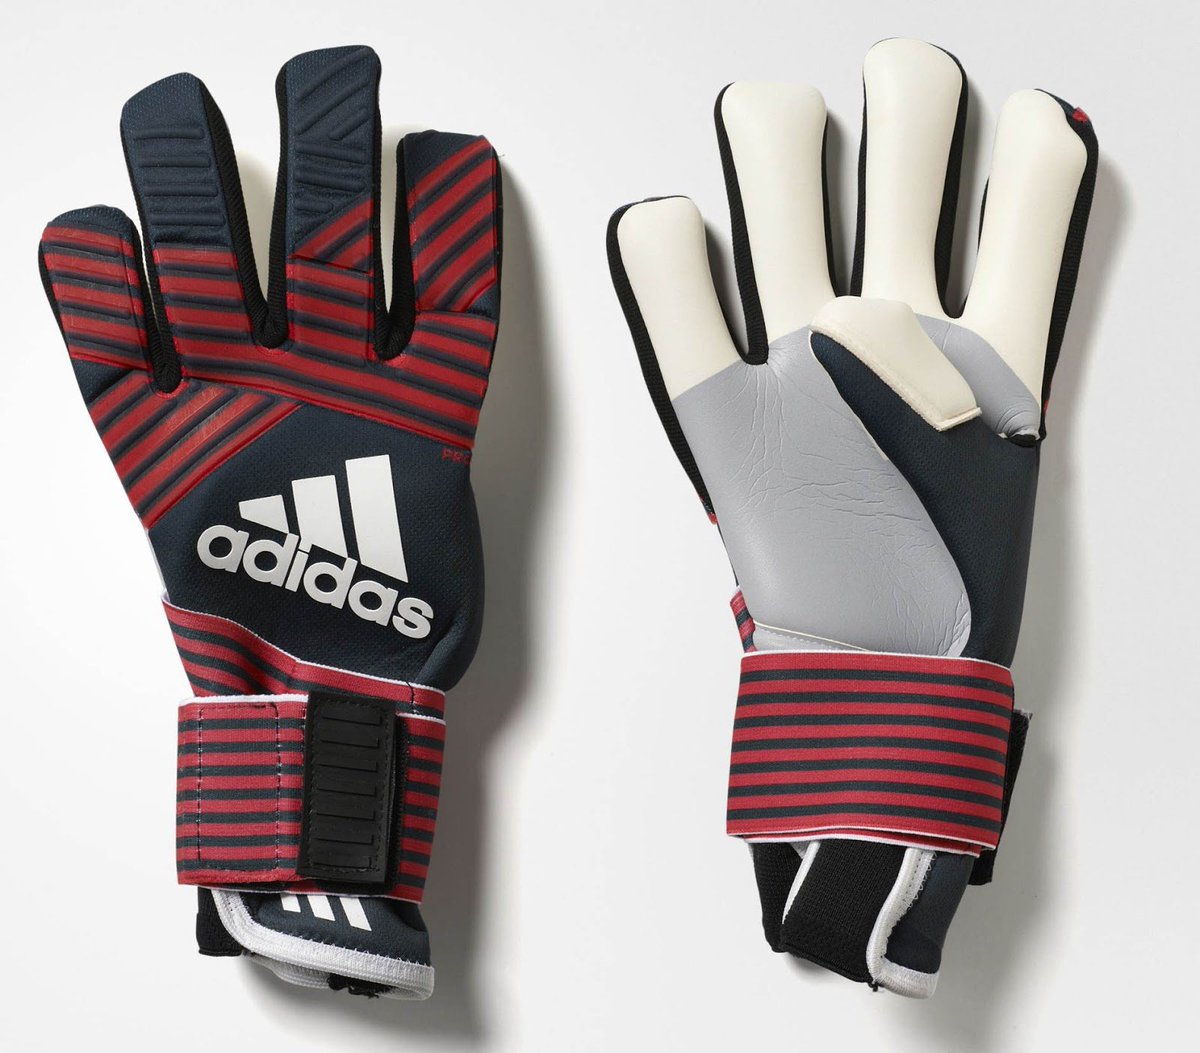 Bayern & Germany on Twitter: "Adidas has released a signature goalkeeper glove for Manuel Neuer - Ace Trans Pro goalkeeper gloves 2017-18 [Footy Headlines] https://t.co/ii9o6mQaM2" / Twitter